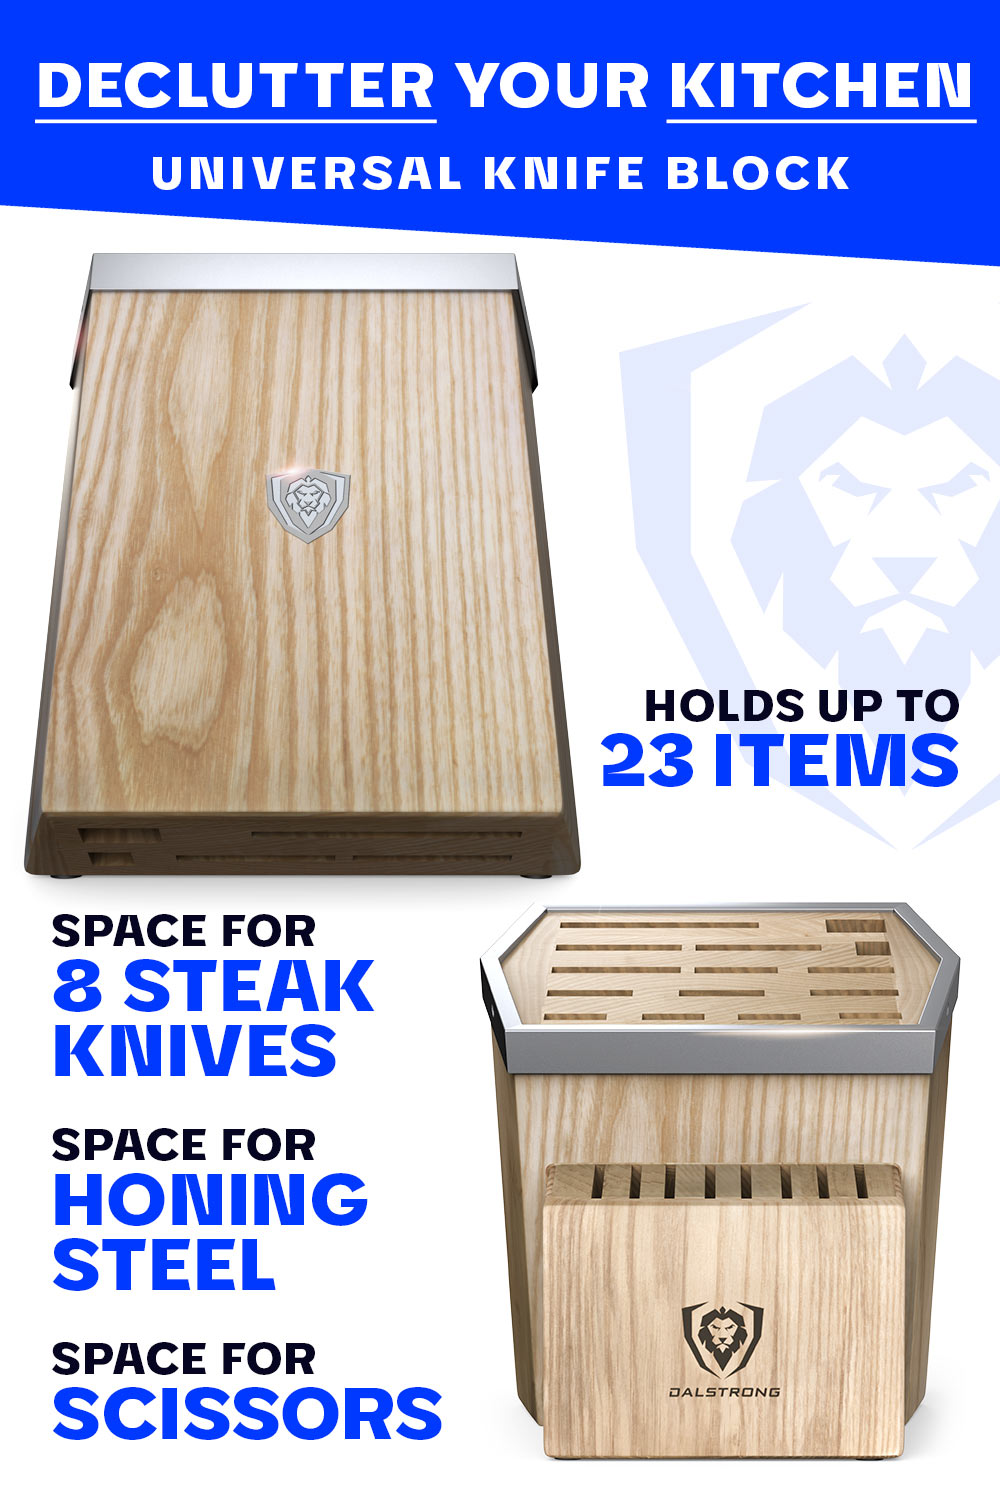 Dalstrong 23 slots universal knife block featuring it's 23 slotted wooden knife block.